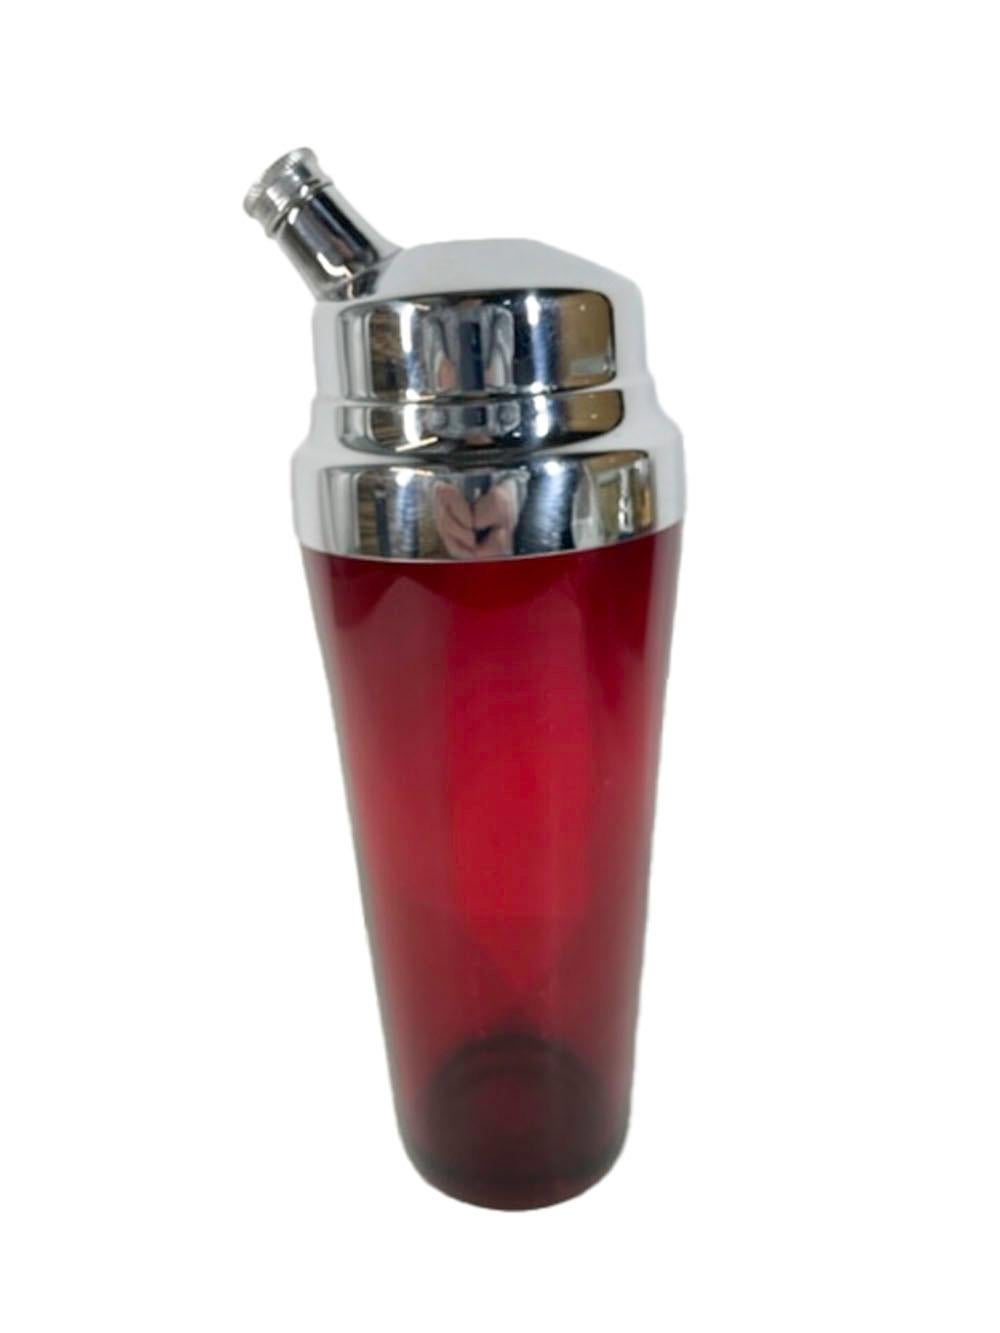 Ruby red glass cocktail shaker with a stepped high-domed chrome lid with a side pour spout.